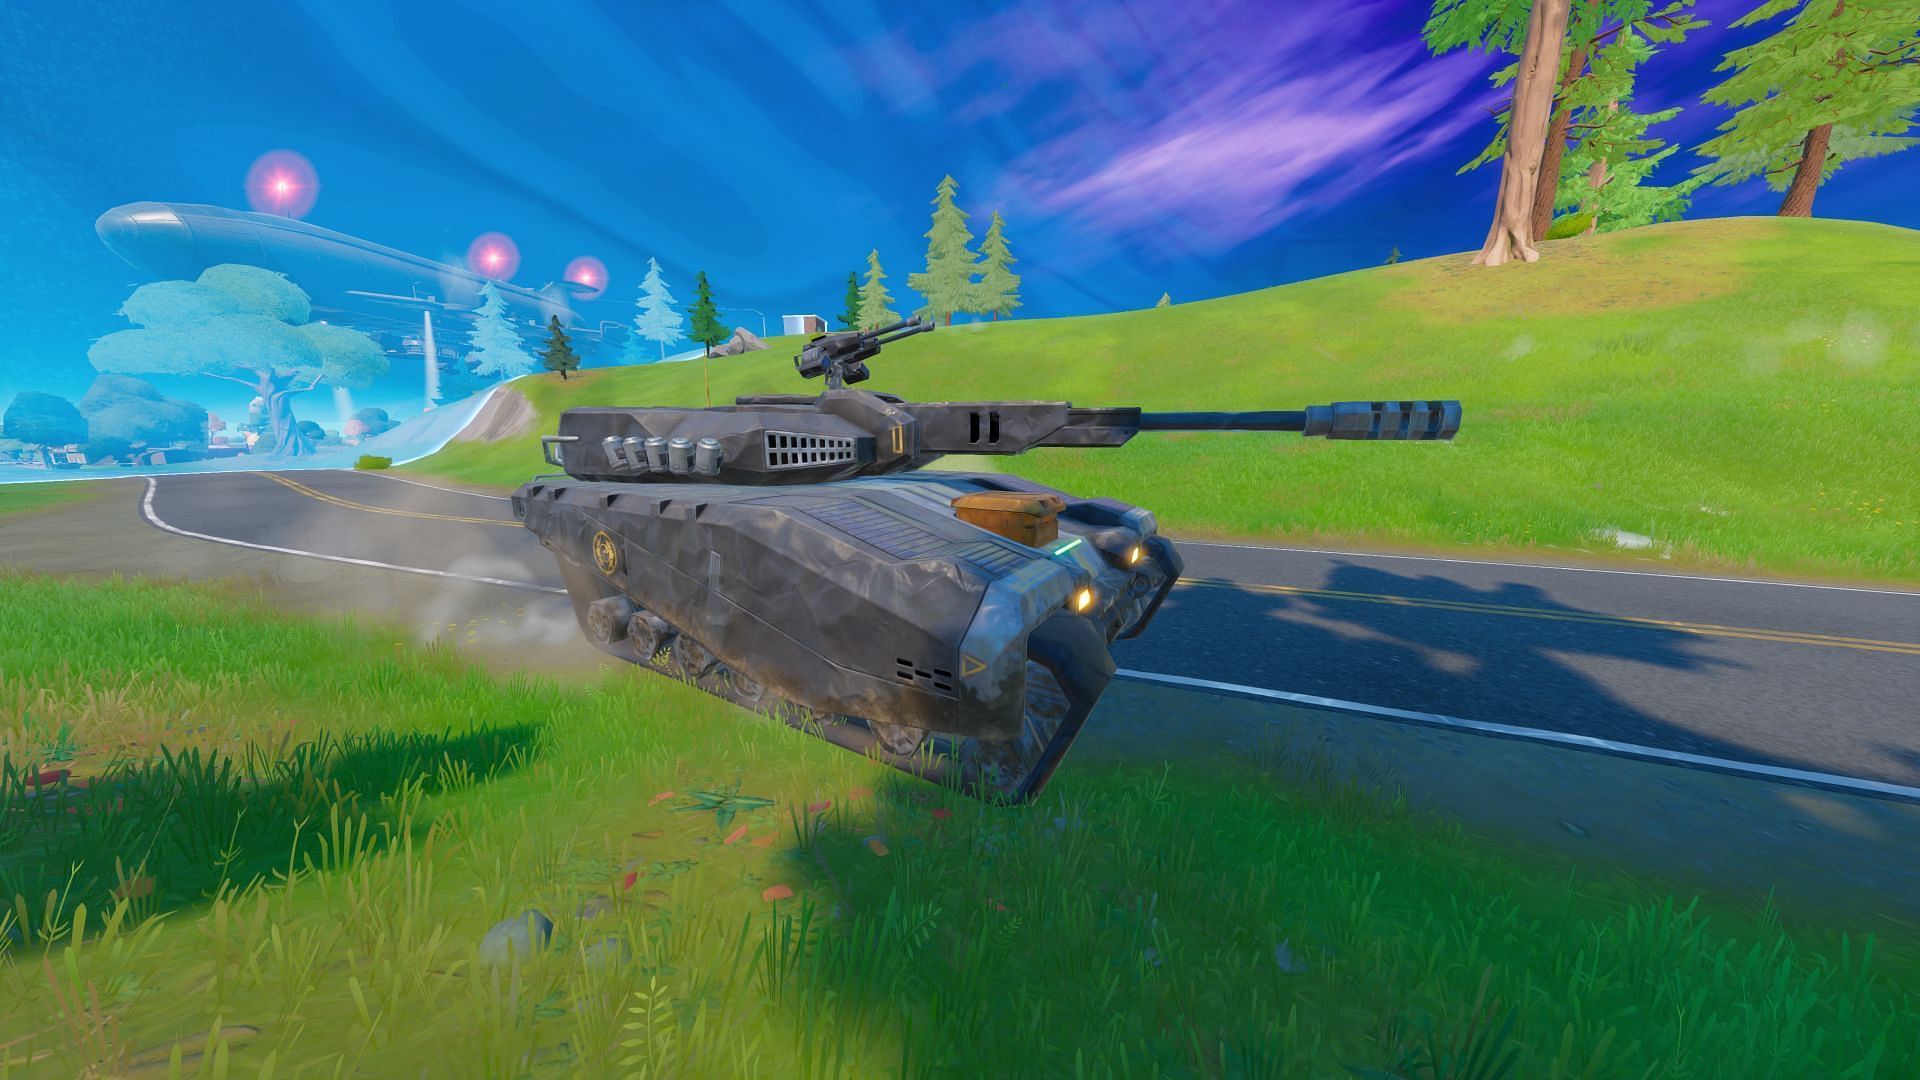 Fortnite Chapter 3 Season 2 has introduced IO Titan Tanks to the game and players can take control of these beasts to gain an advantage in a match (Image via Epic Games)